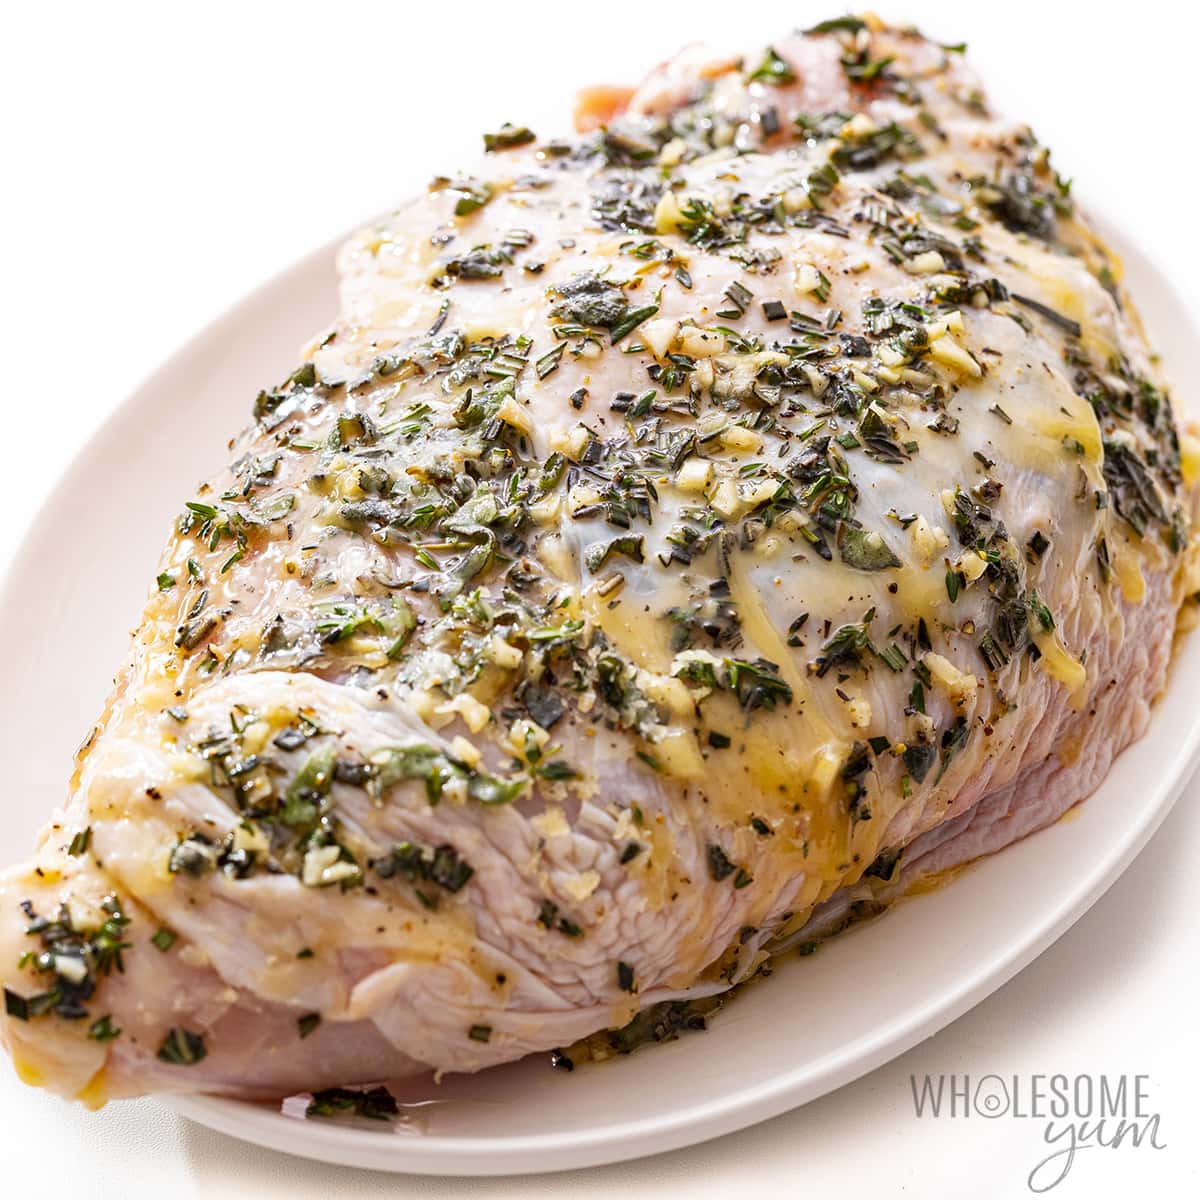 Herb butter rubbed on turkey breast.